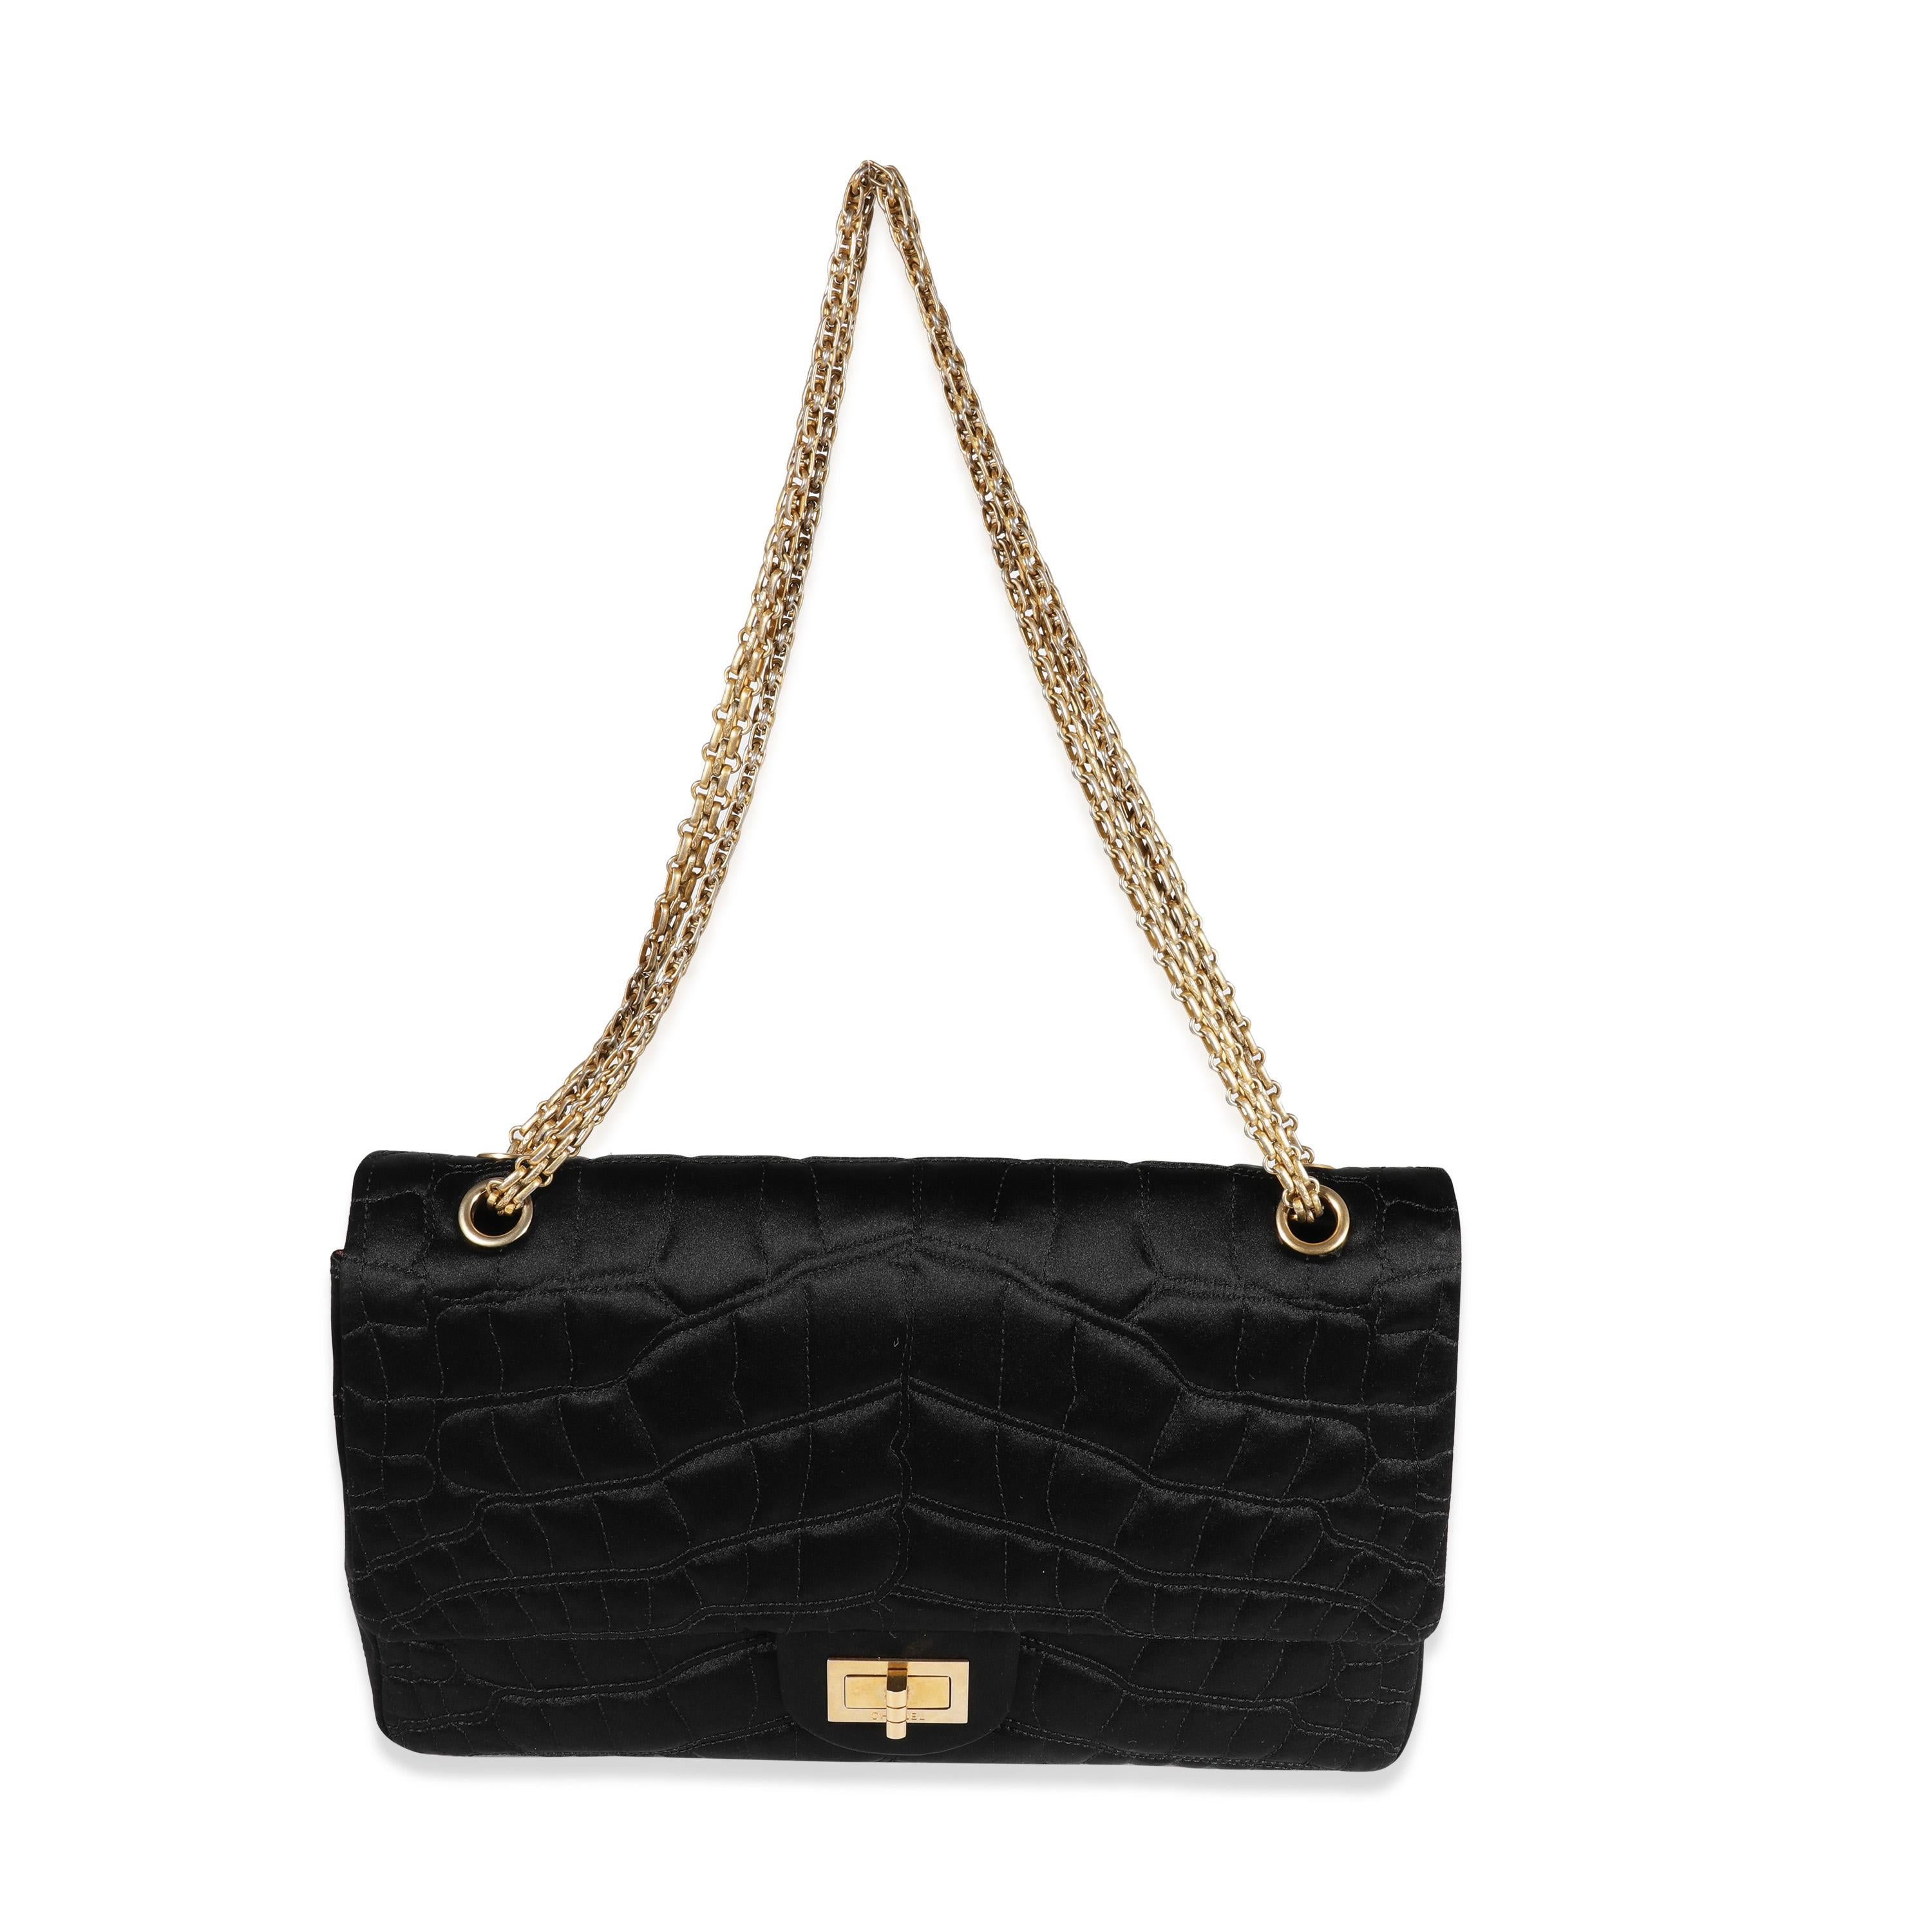 Listing Title: Chanel Black Crocodile Stitch Satin Reissue 2.55 227 Double Flap Bag
SKU: 122322
Condition: Pre-owned 
Handbag Condition: Very Good
Condition Comments: Very Good Condition. Light snags to exterior. Scratching and tarnishing to